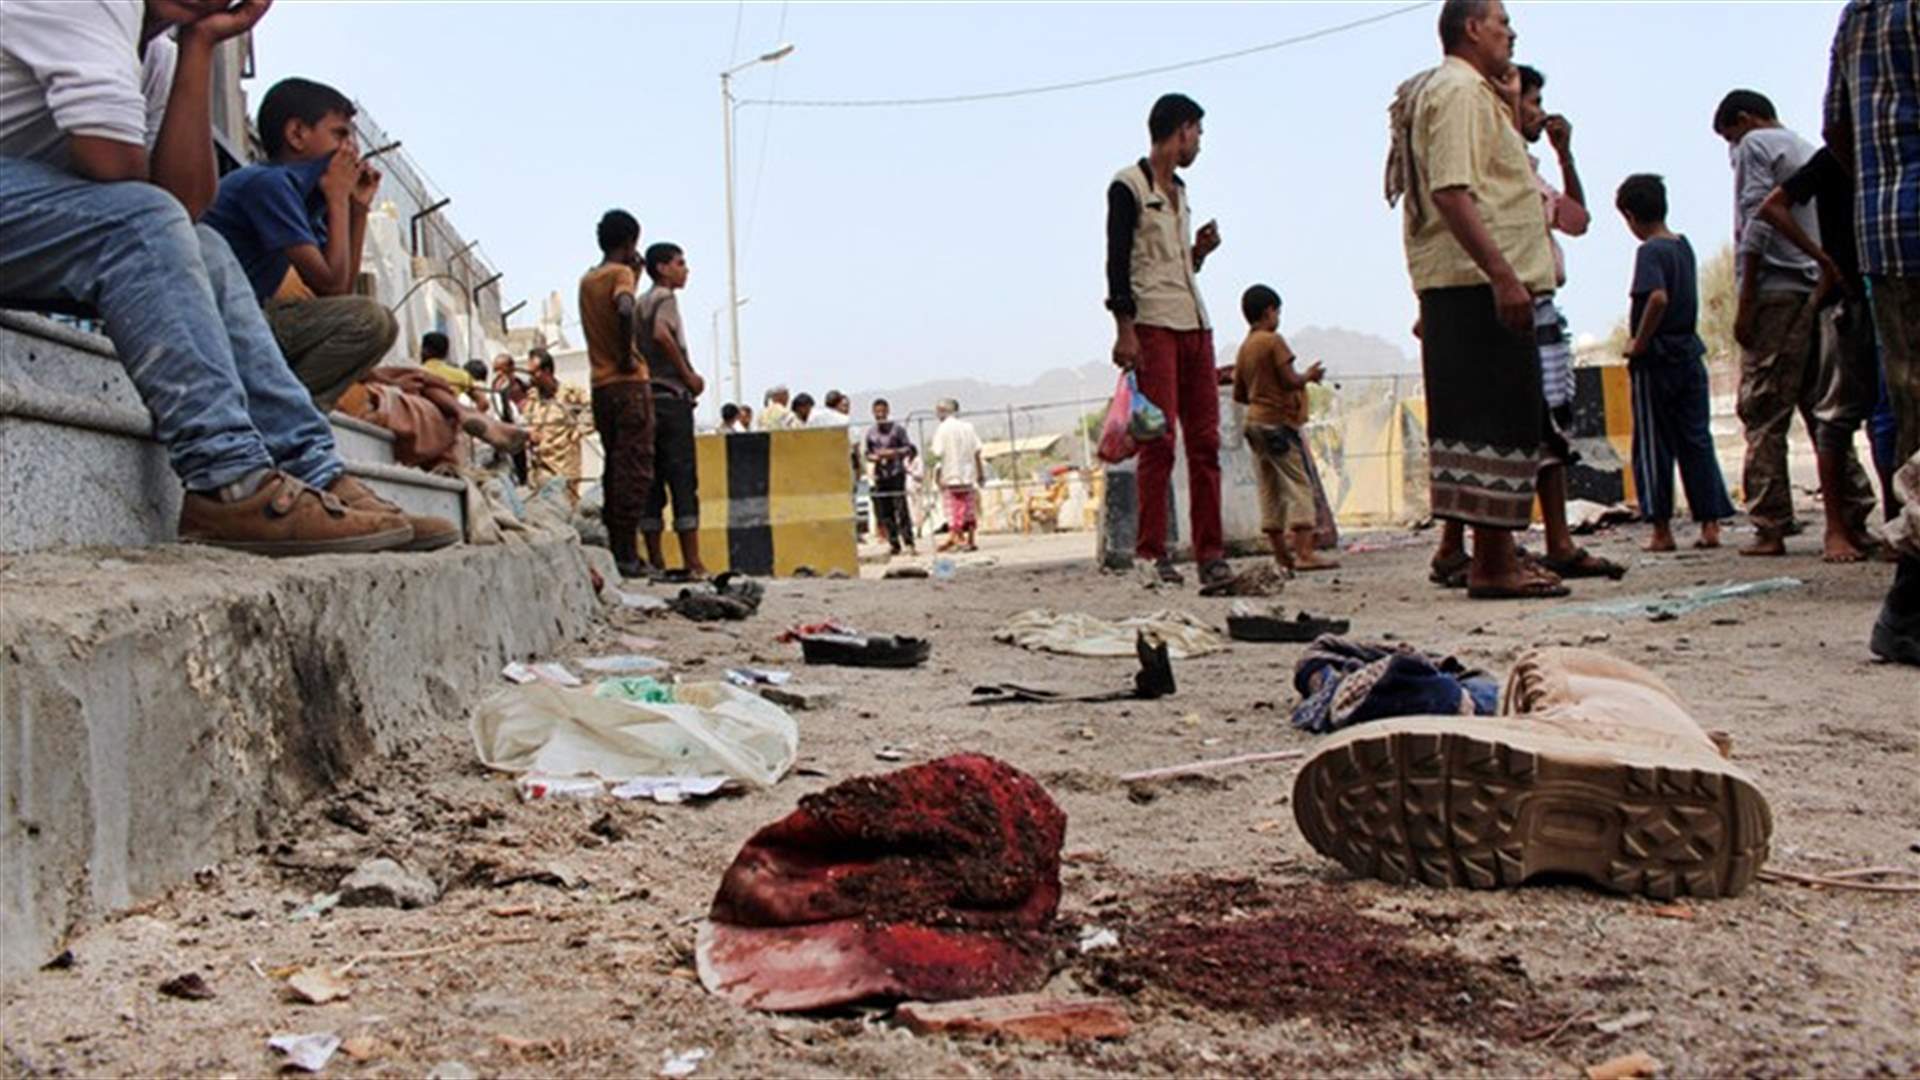 Suicide bomber kills one person, wounds three in Yemeni port city